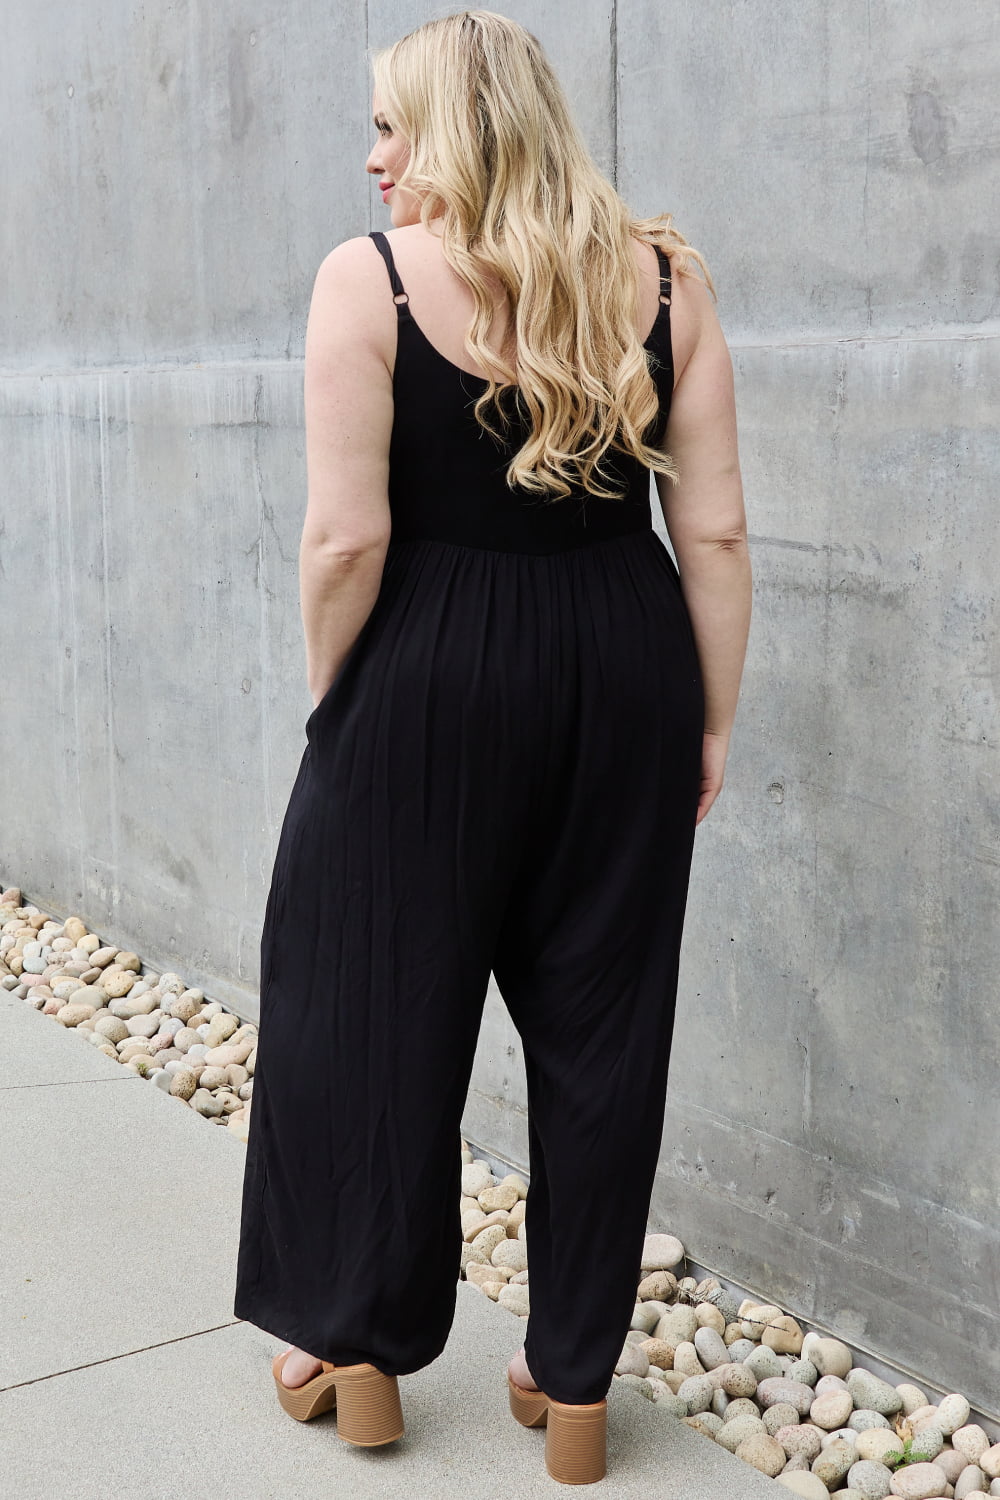 All Day Full Size Wide Leg Button Down Jumpsuit in Black - Women’s Clothing & Accessories - Jumpsuits & Rompers - 7